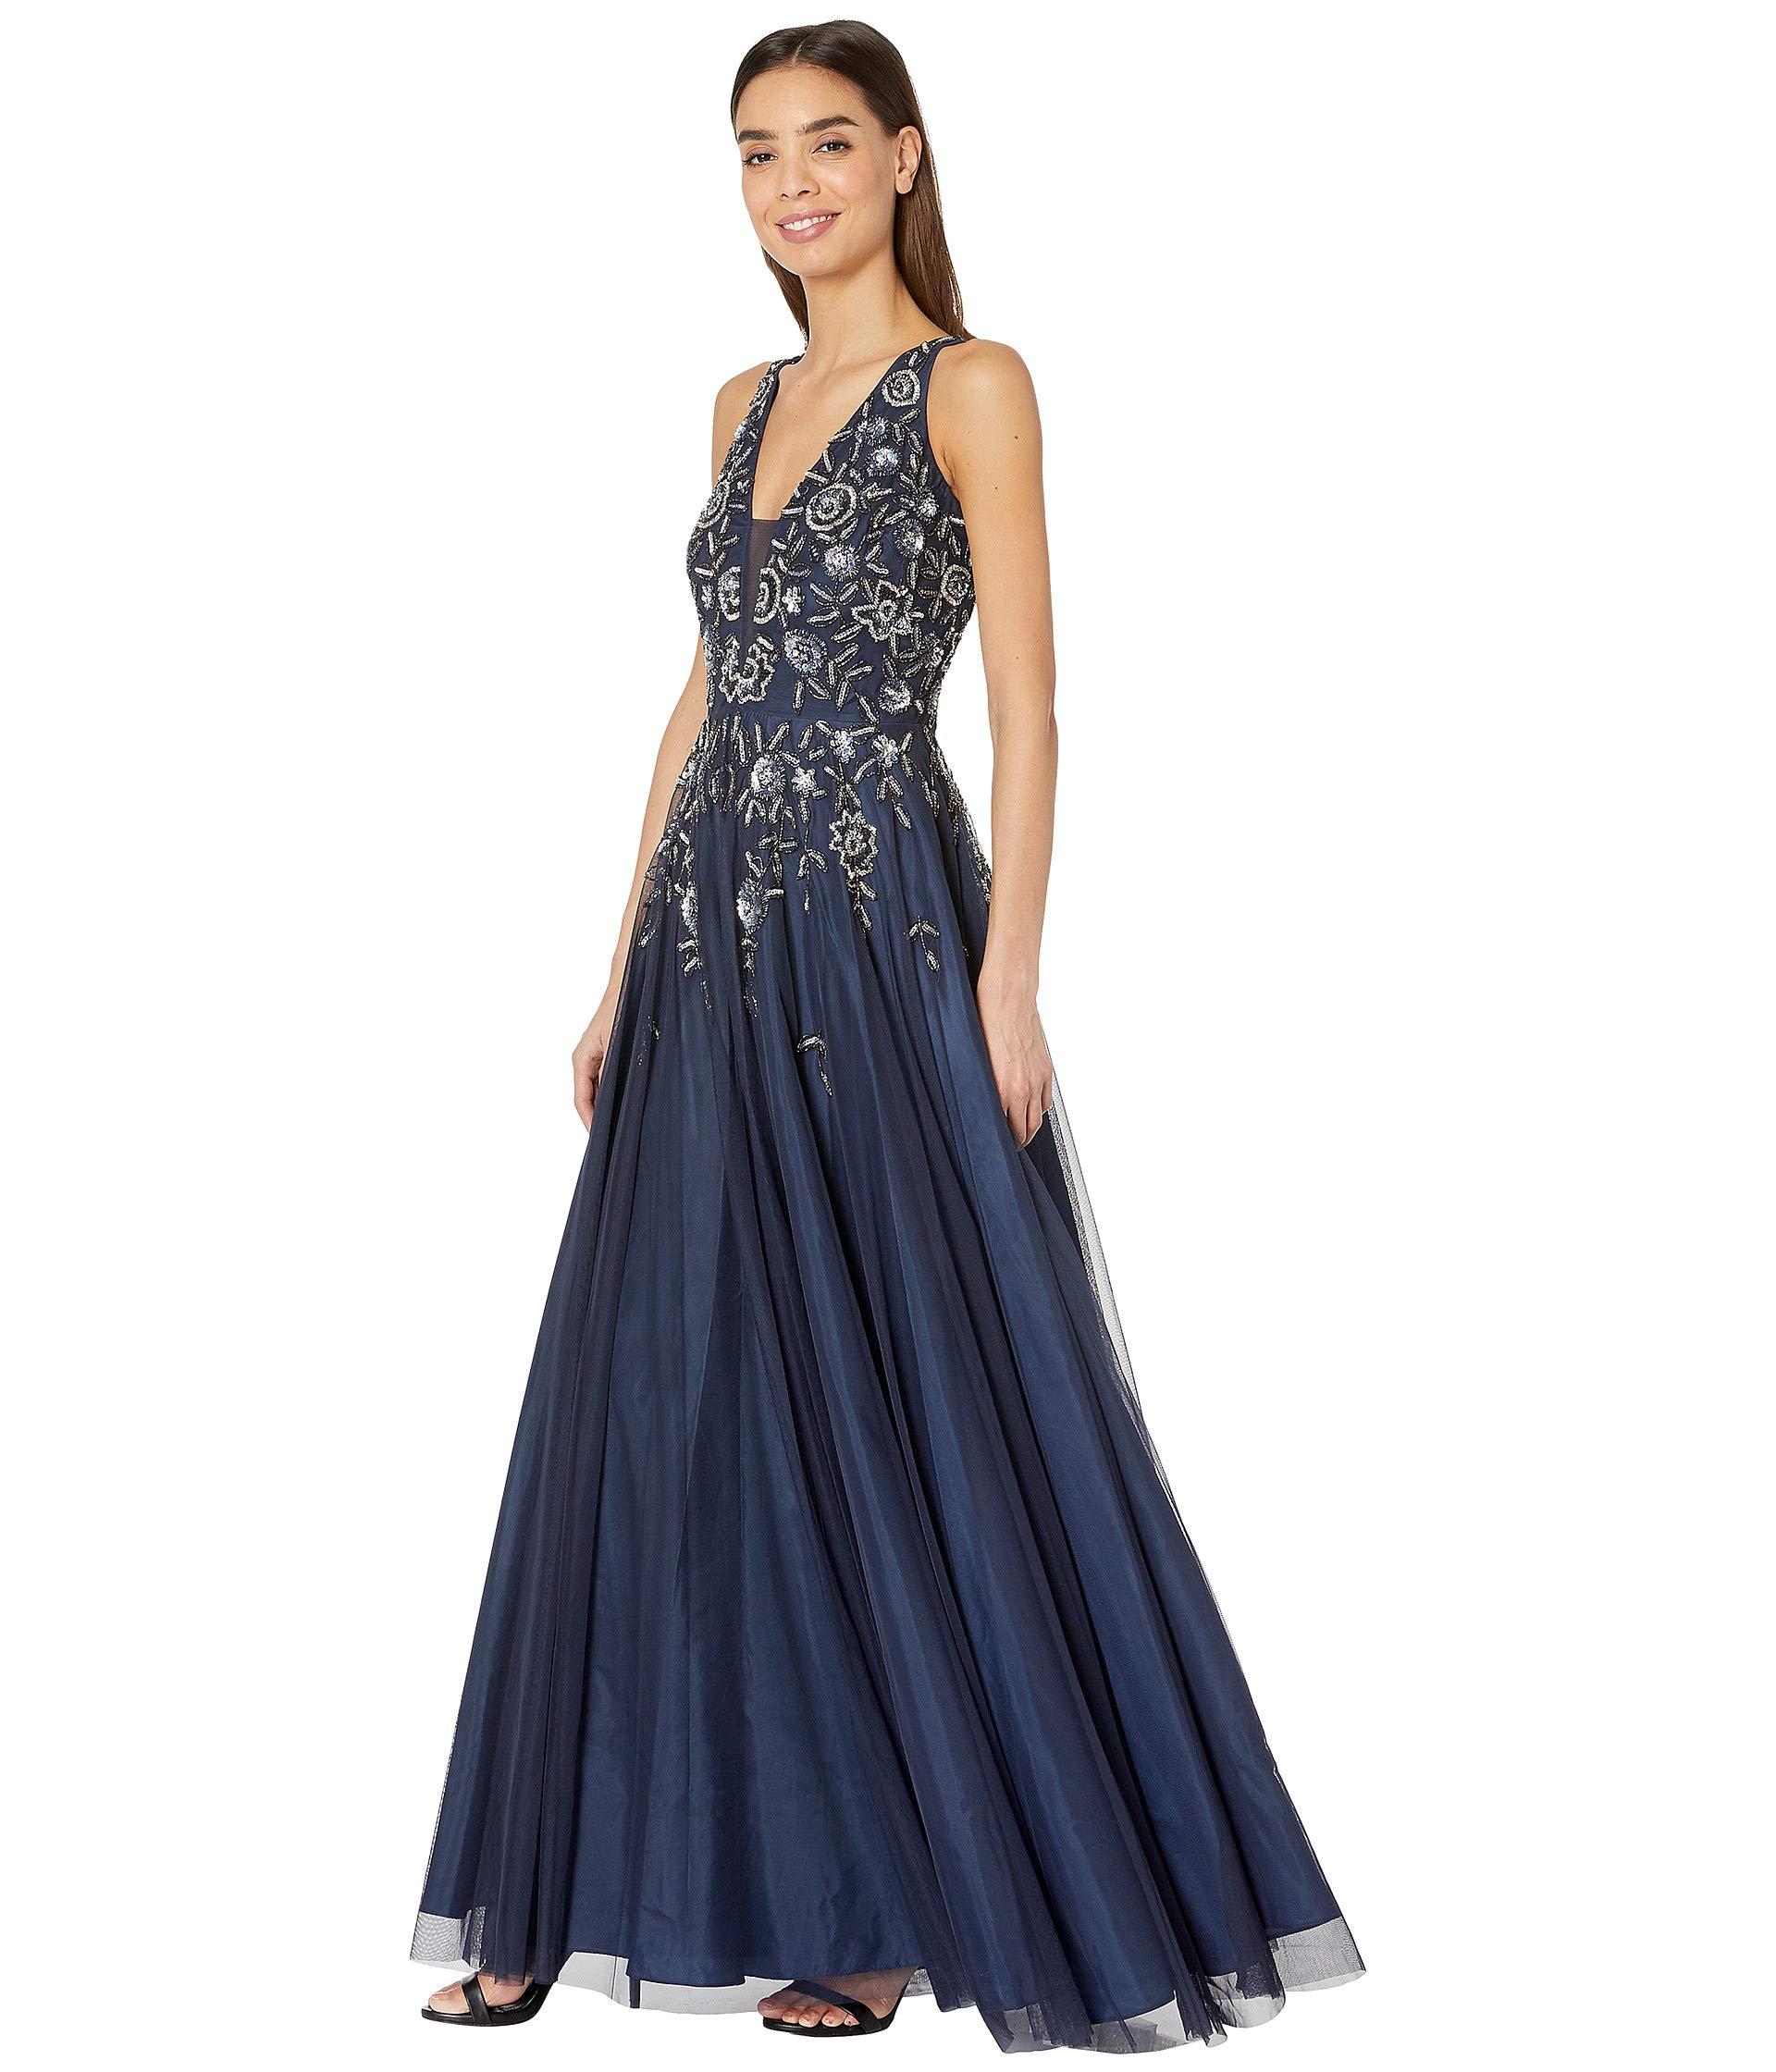 Adrianna Papell Synthetic Beaded Mesh Long V-neck Gown in Navy (Blue) - Lyst